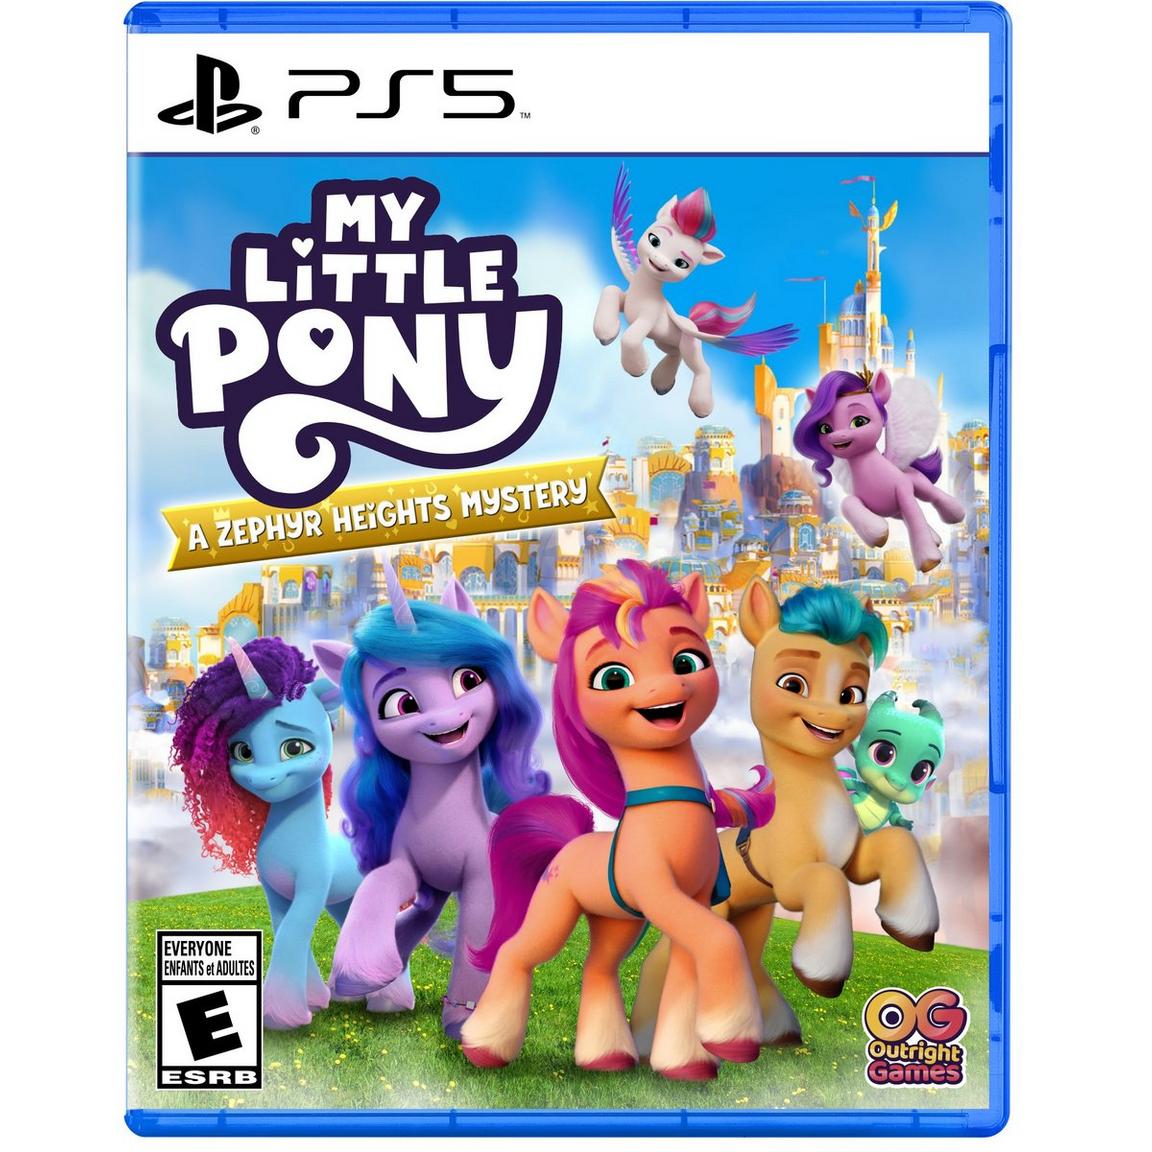 My Little Pony: A Zephyr Heights Mystery - PlayStation 5